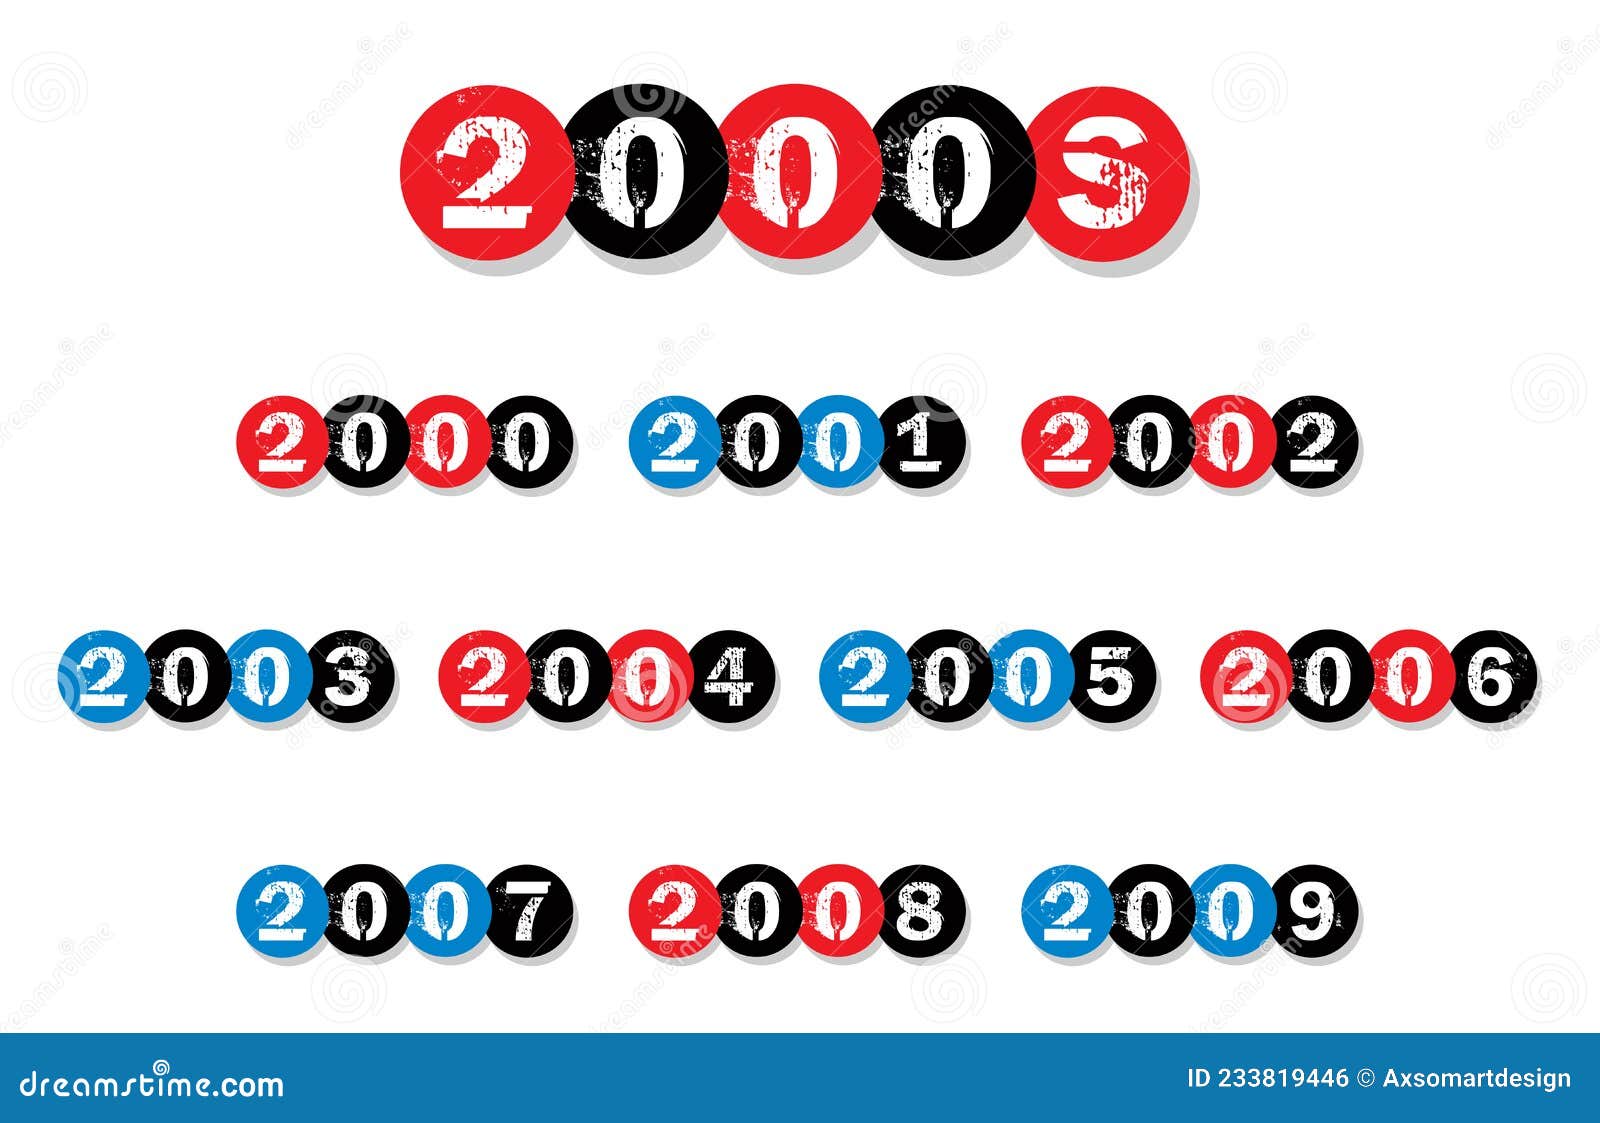 2000s year labels | timeline clipart and calendar headers | millennial graphics | reunion banners | aughts resource